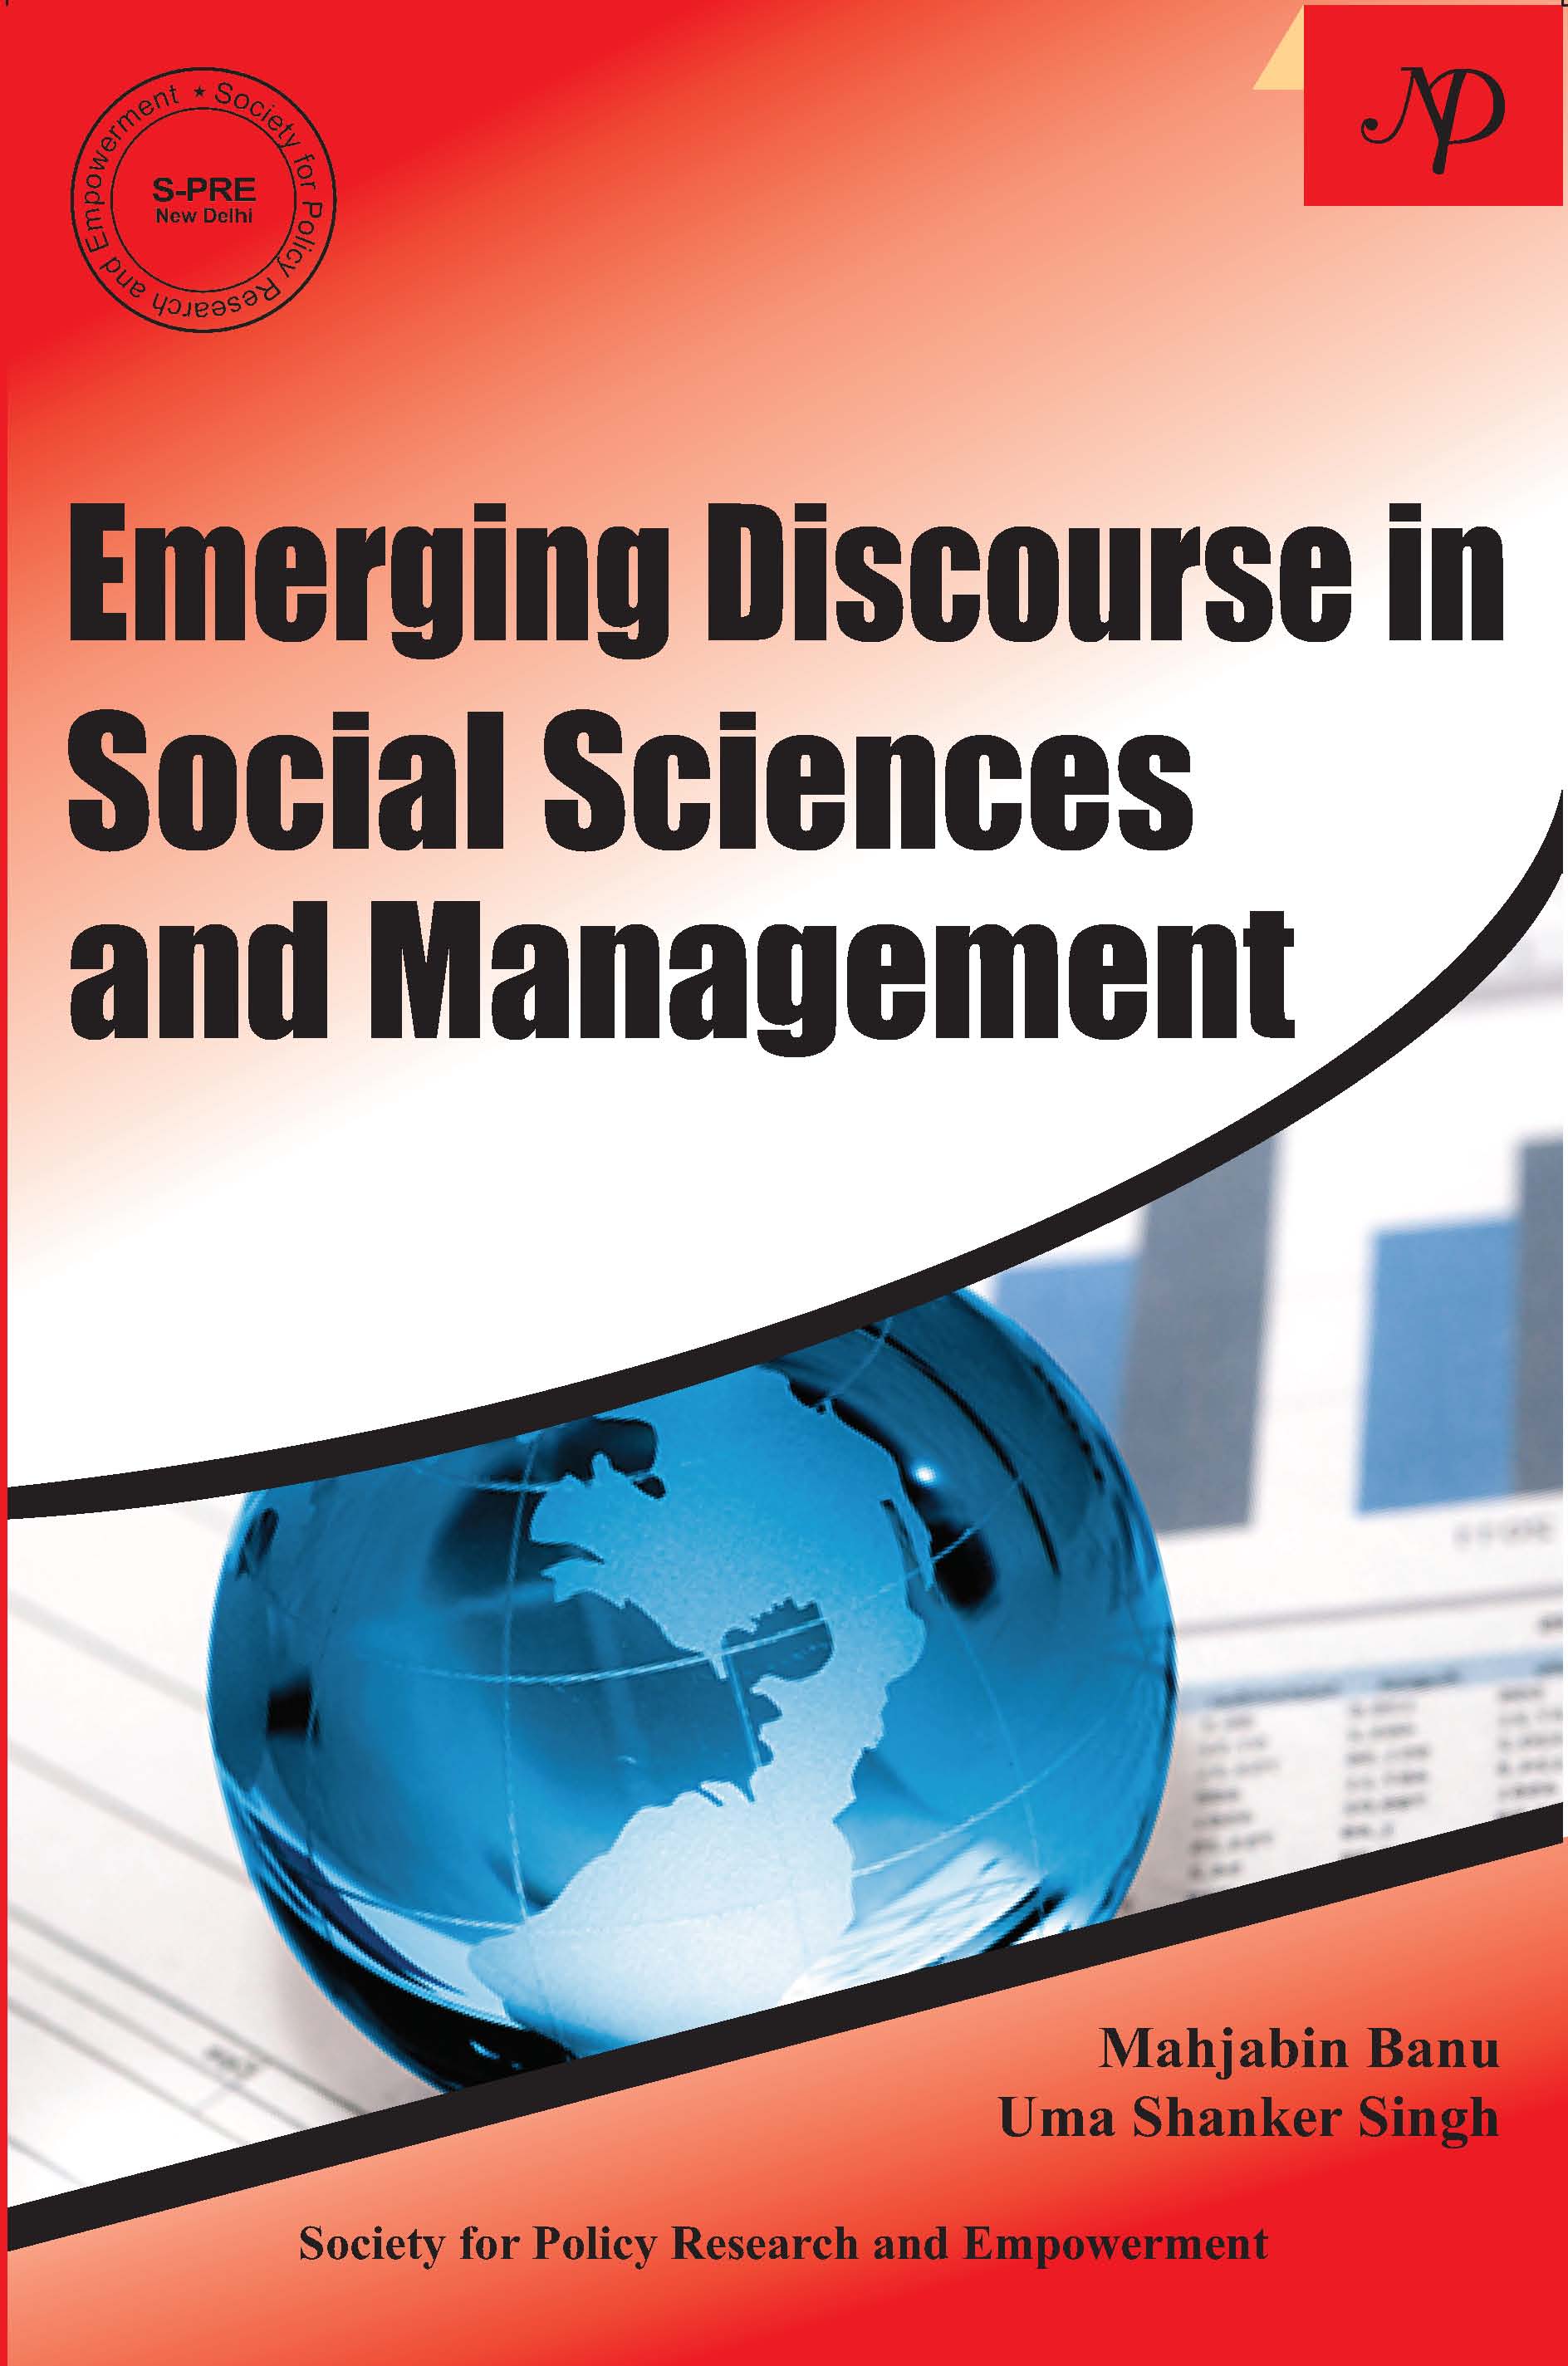 Cover Emerging Discourse in Social Sciences and Management.jpg